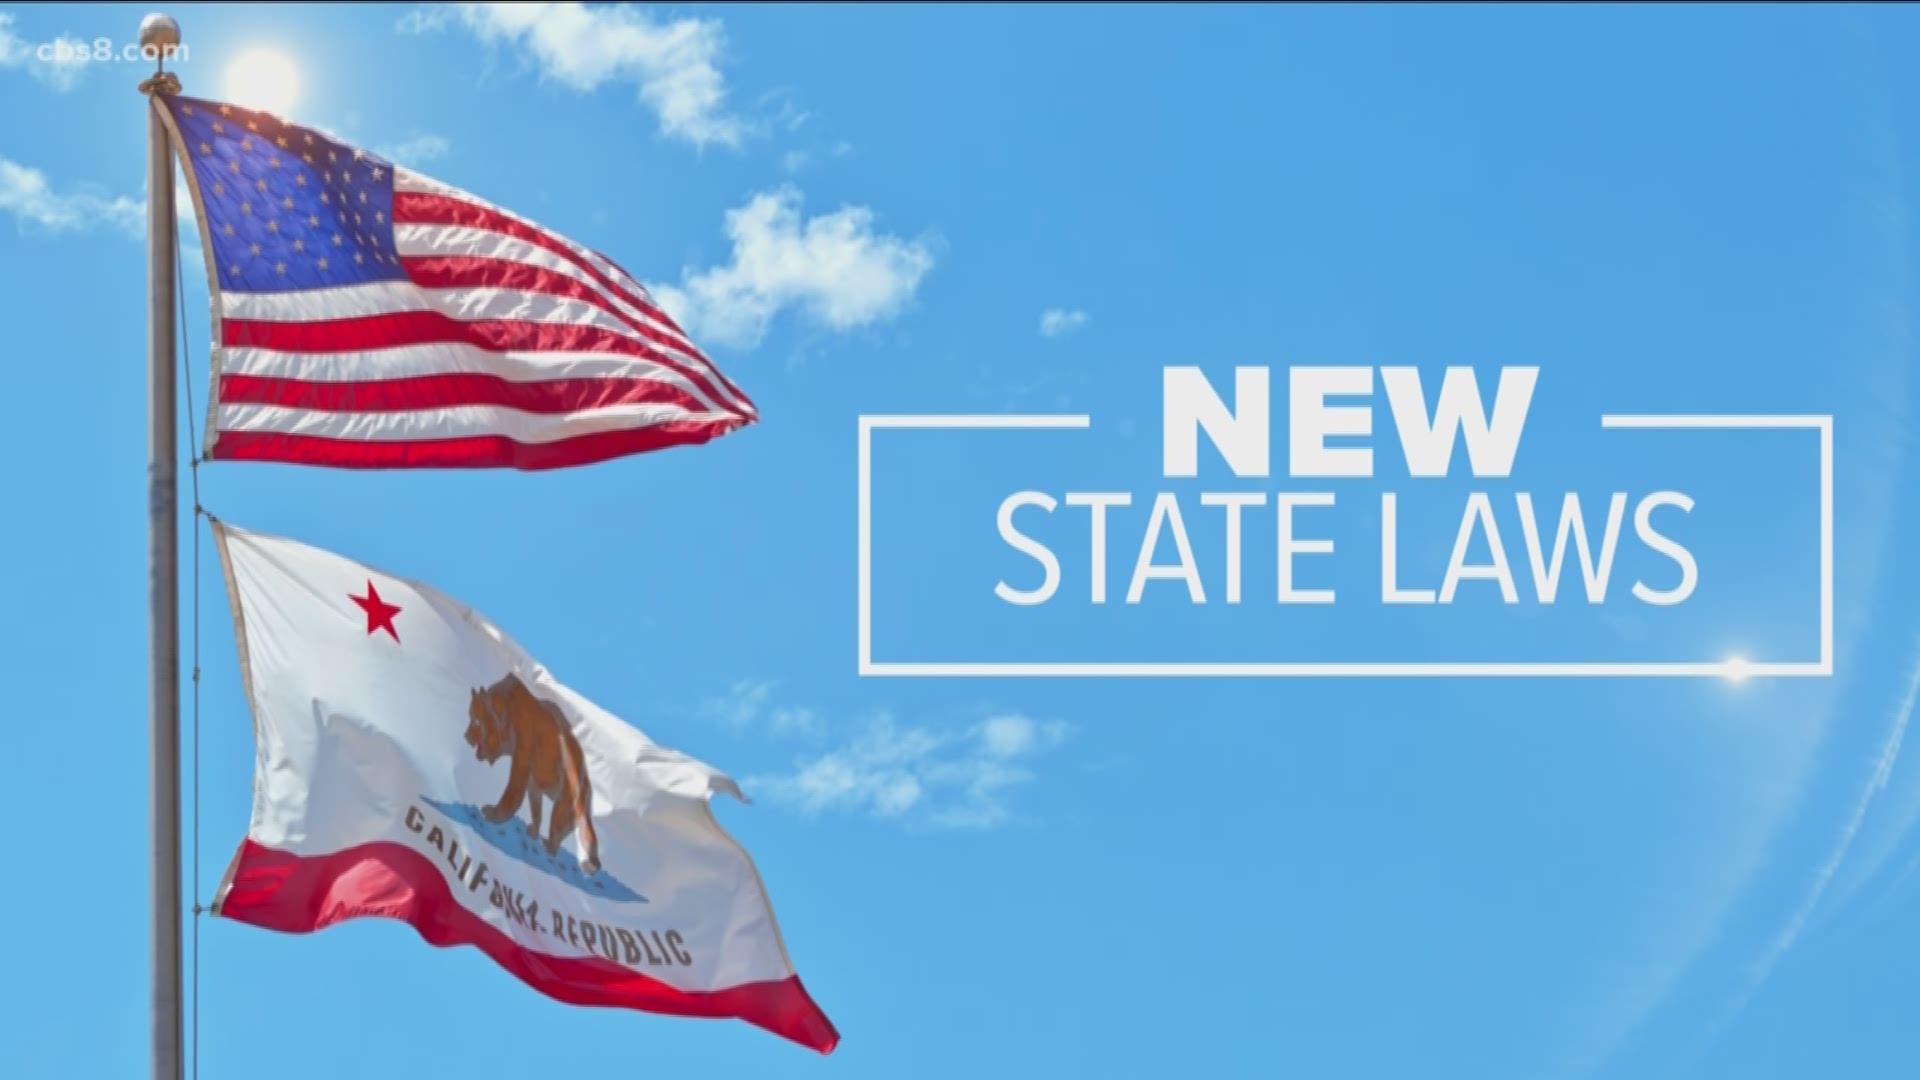 Here is information on new laws in California that go into effect in the new year.